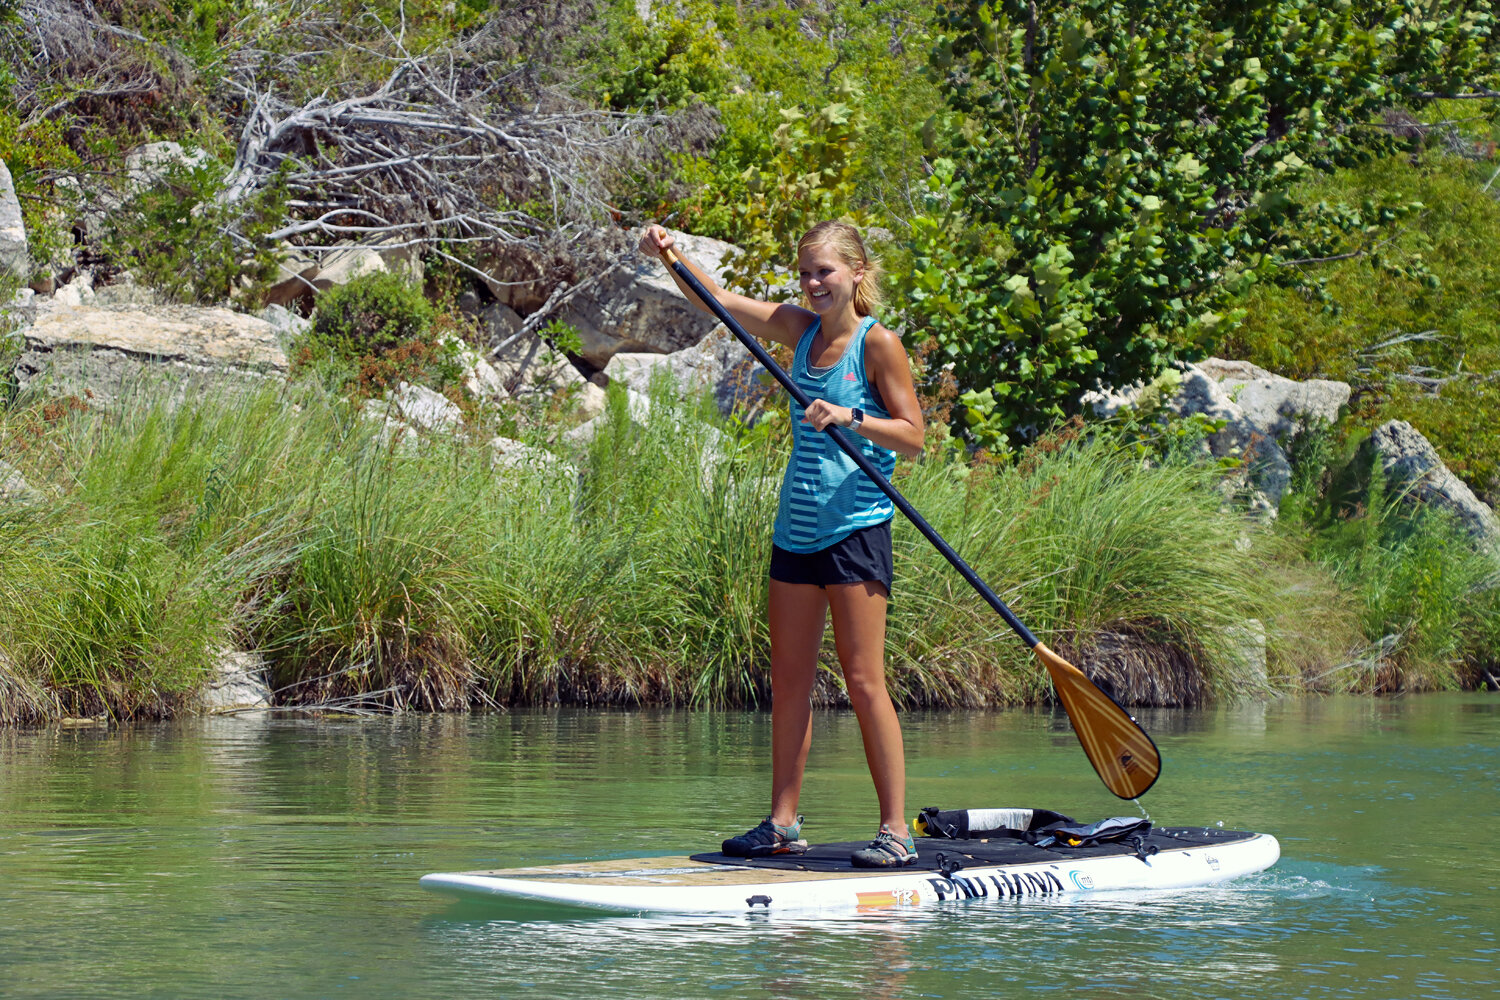 What Type of Paddle For Standup Paddleboard (SUP)? — Texas Kayak